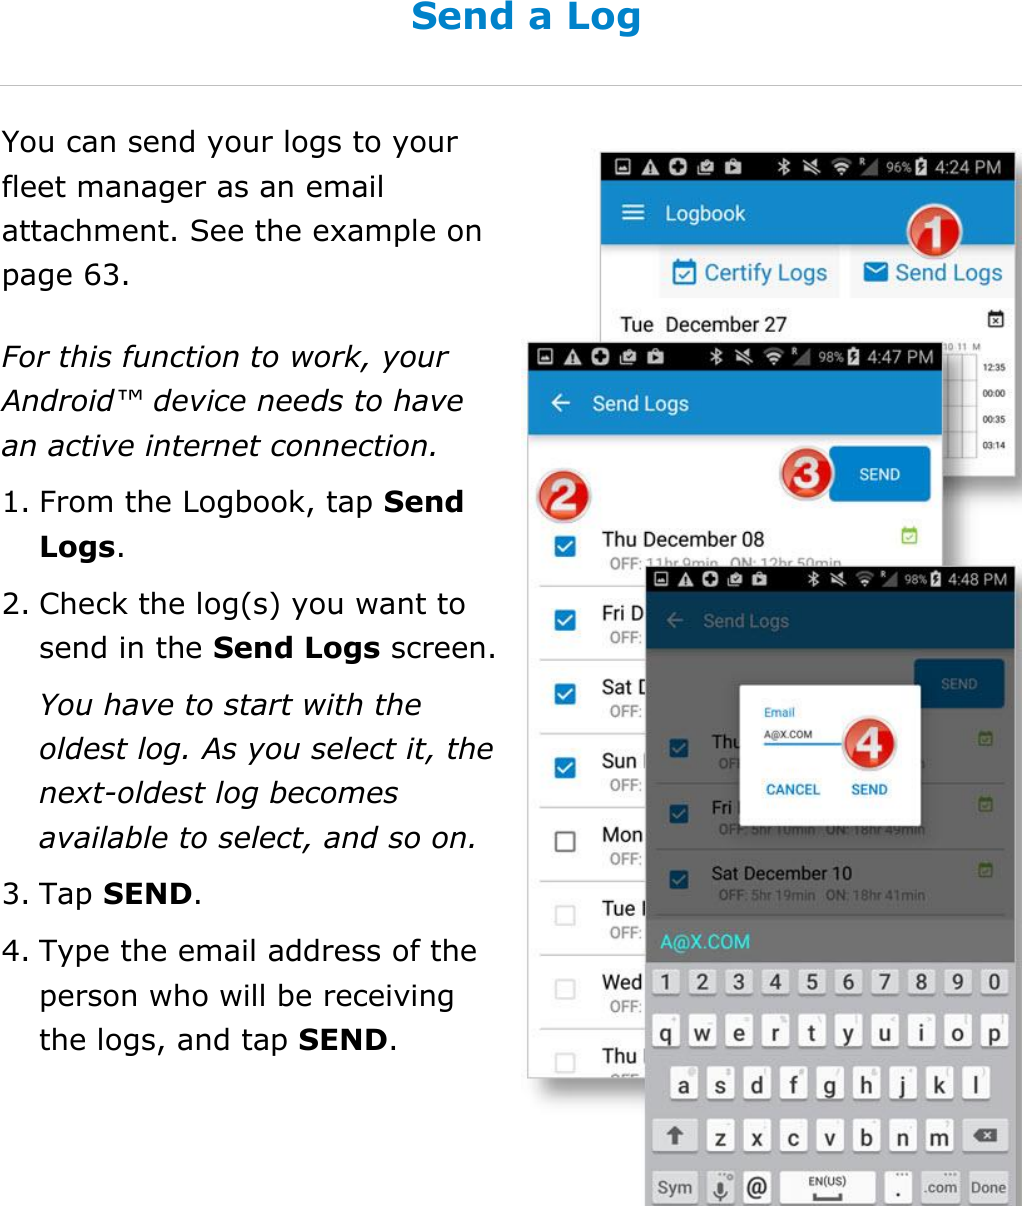 Manage My Logbook DriverConnect User Guide  46 © 2017, Rand McNally, Inc. Send a Log You can send your logs to your fleet manager as an email attachment. See the example on page 63. For this function to work, your Android™ device needs to have an active internet connection. 1. From the Logbook, tap Send Logs. 2. Check the log(s) you want to send in the Send Logs screen. You have to start with the oldest log. As you select it, the next-oldest log becomes available to select, and so on. 3. Tap SEND. 4. Type the email address of the person who will be receiving the logs, and tap SEND.    